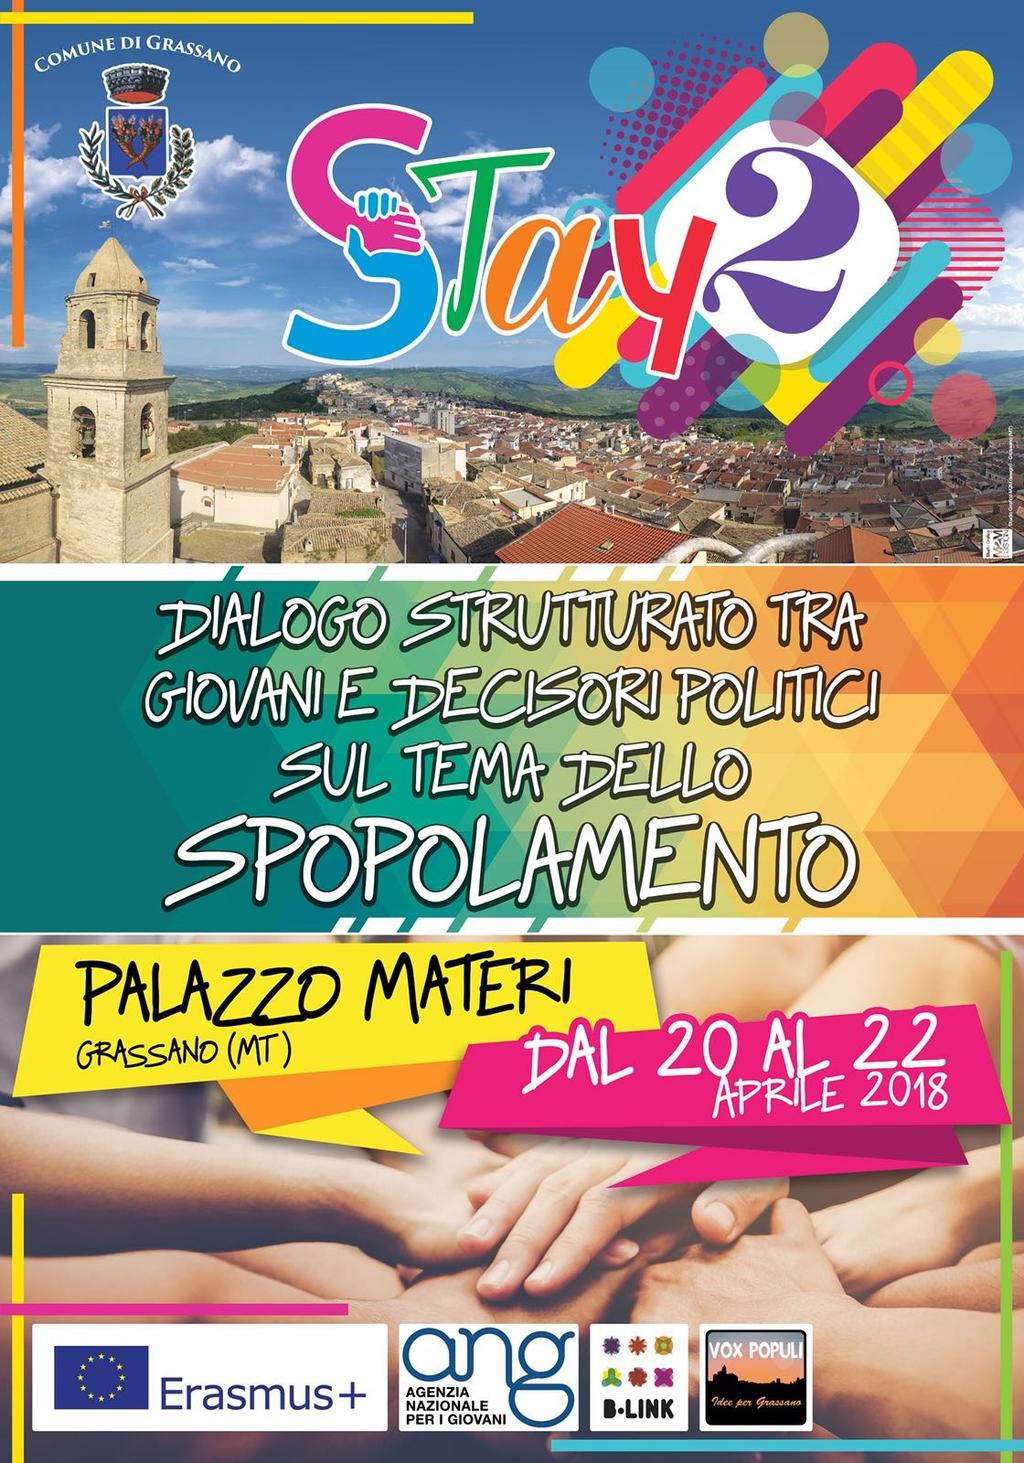 STAY II Small Town Aware Youth / Dialogo